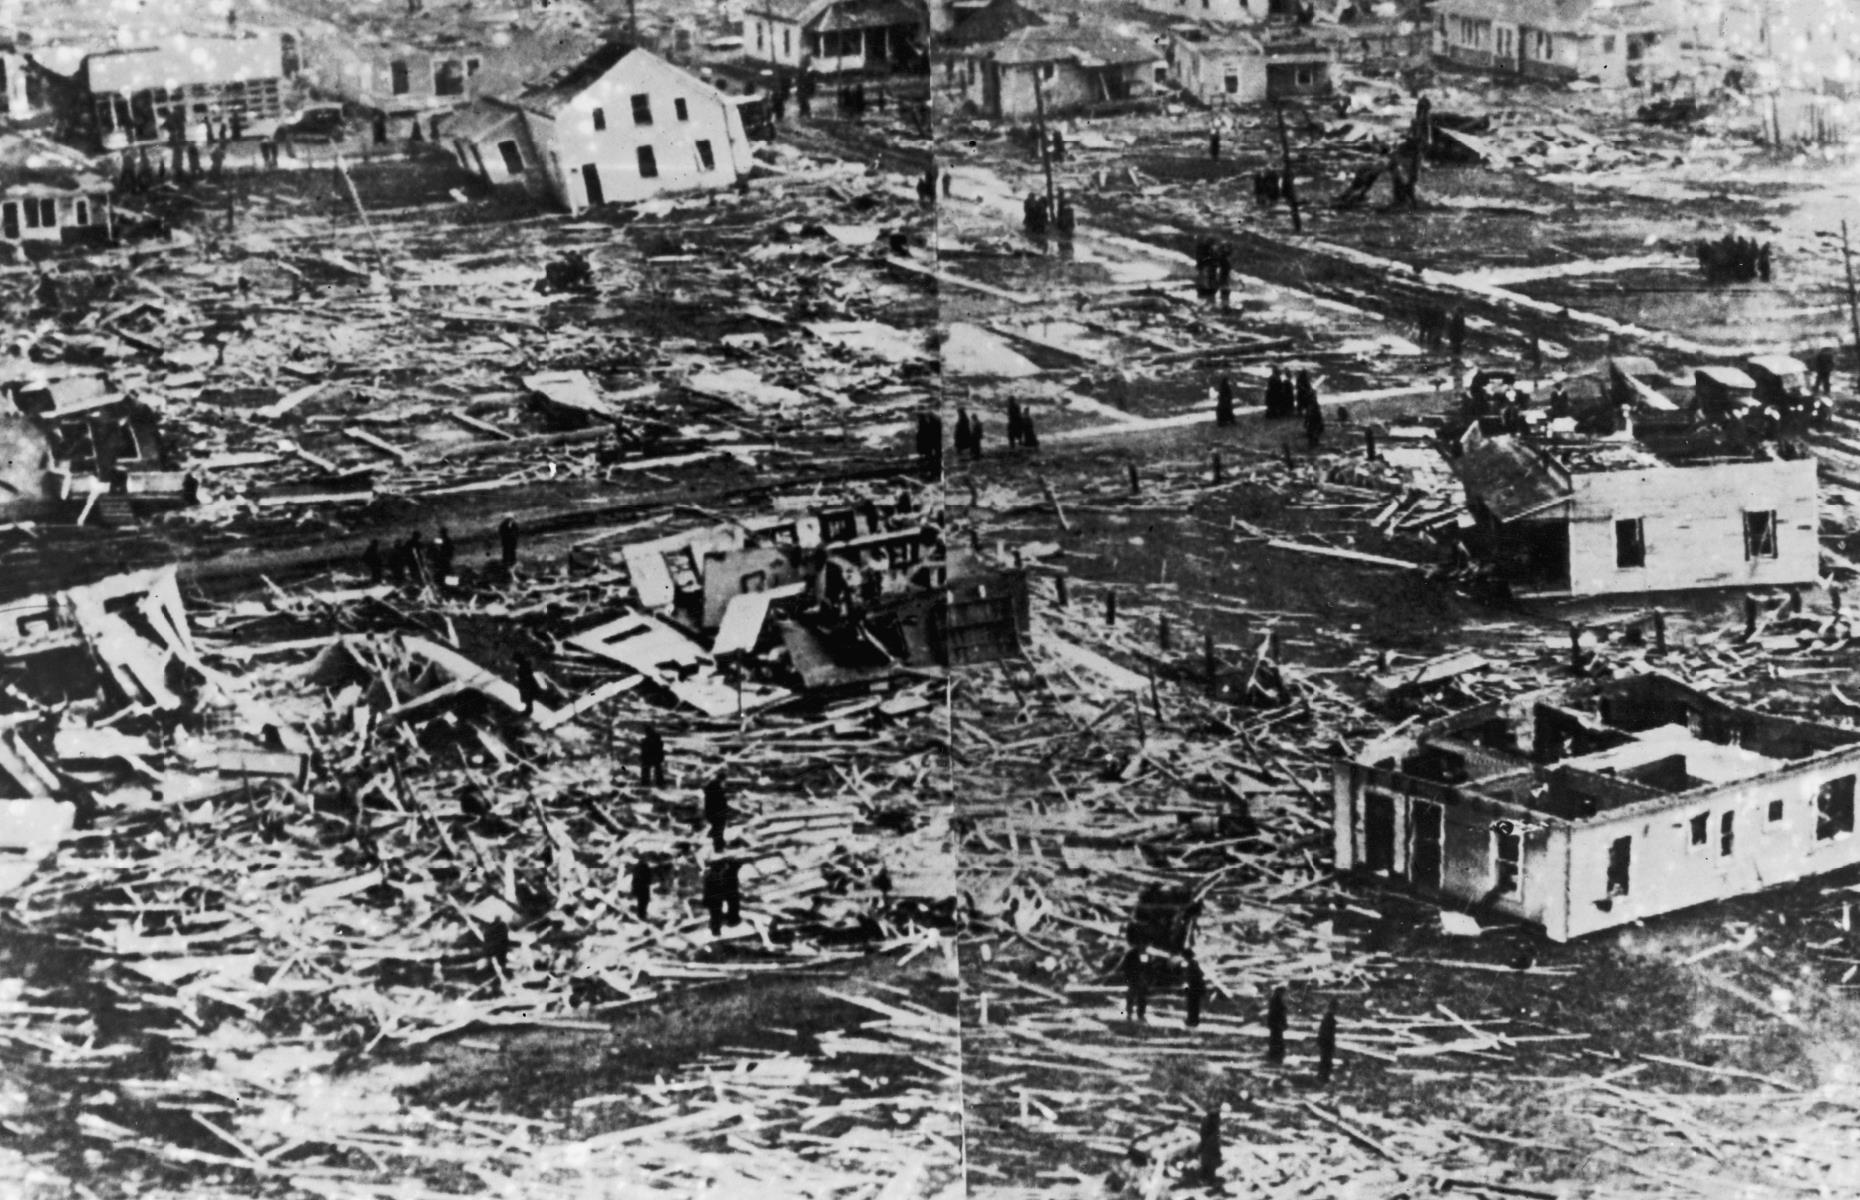 Deadly and devastating tornadoes throughout the world's history